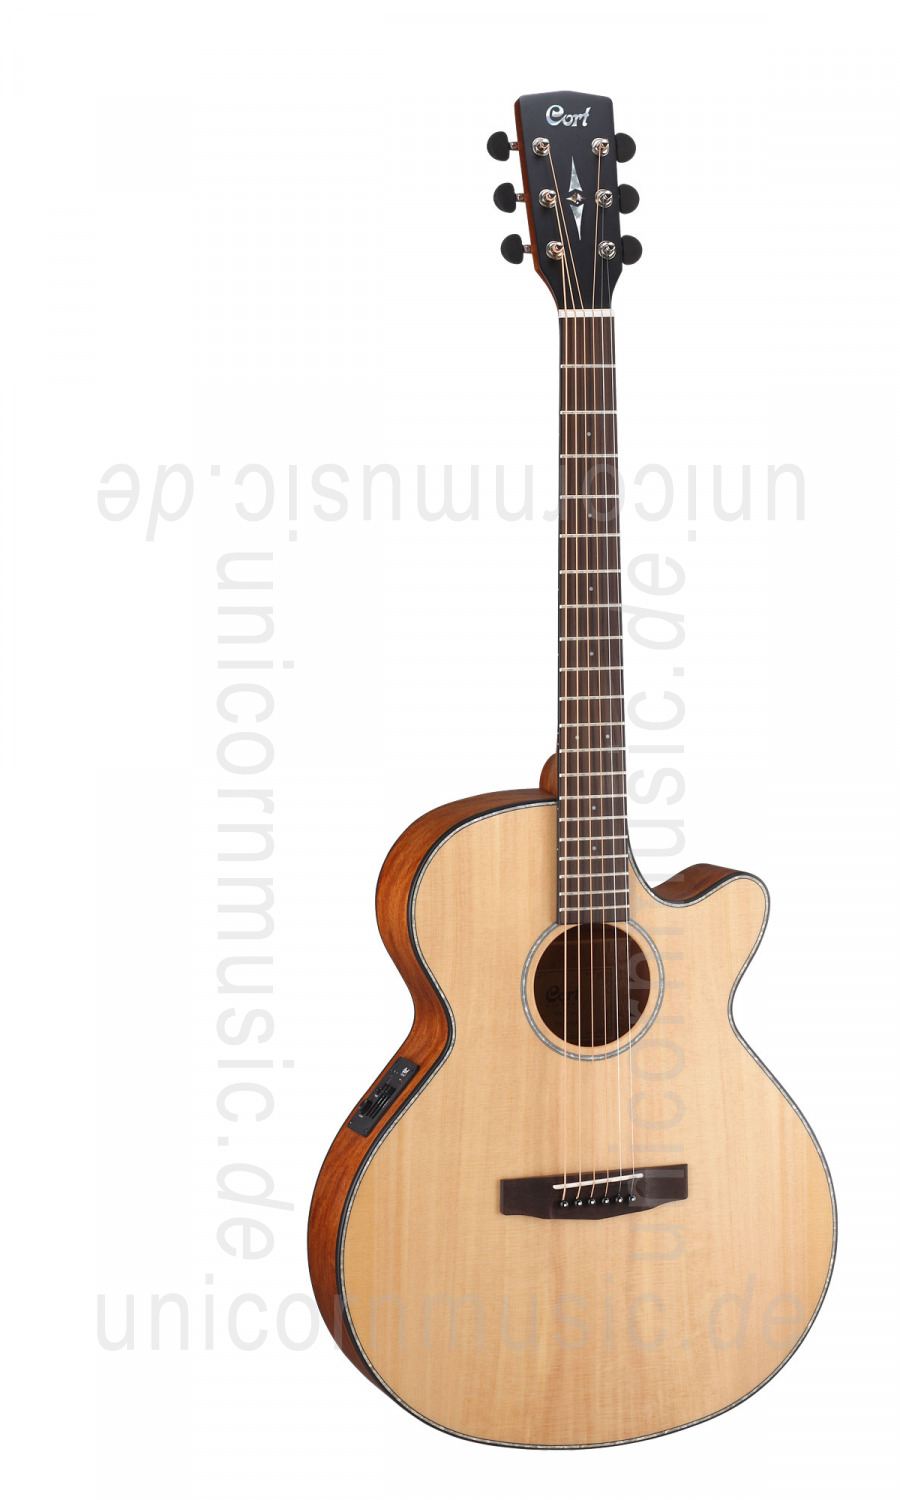 Acoustic Guitar CORT SFX E NS - Super Folk - Pickup - Cutaway - solid  spruce top, Factory-new buy at , Guitars, Acoustic  Guitars, musical instruments, Steelstring Guitars, Acoustic Guitars, WG-SFX -E-NS